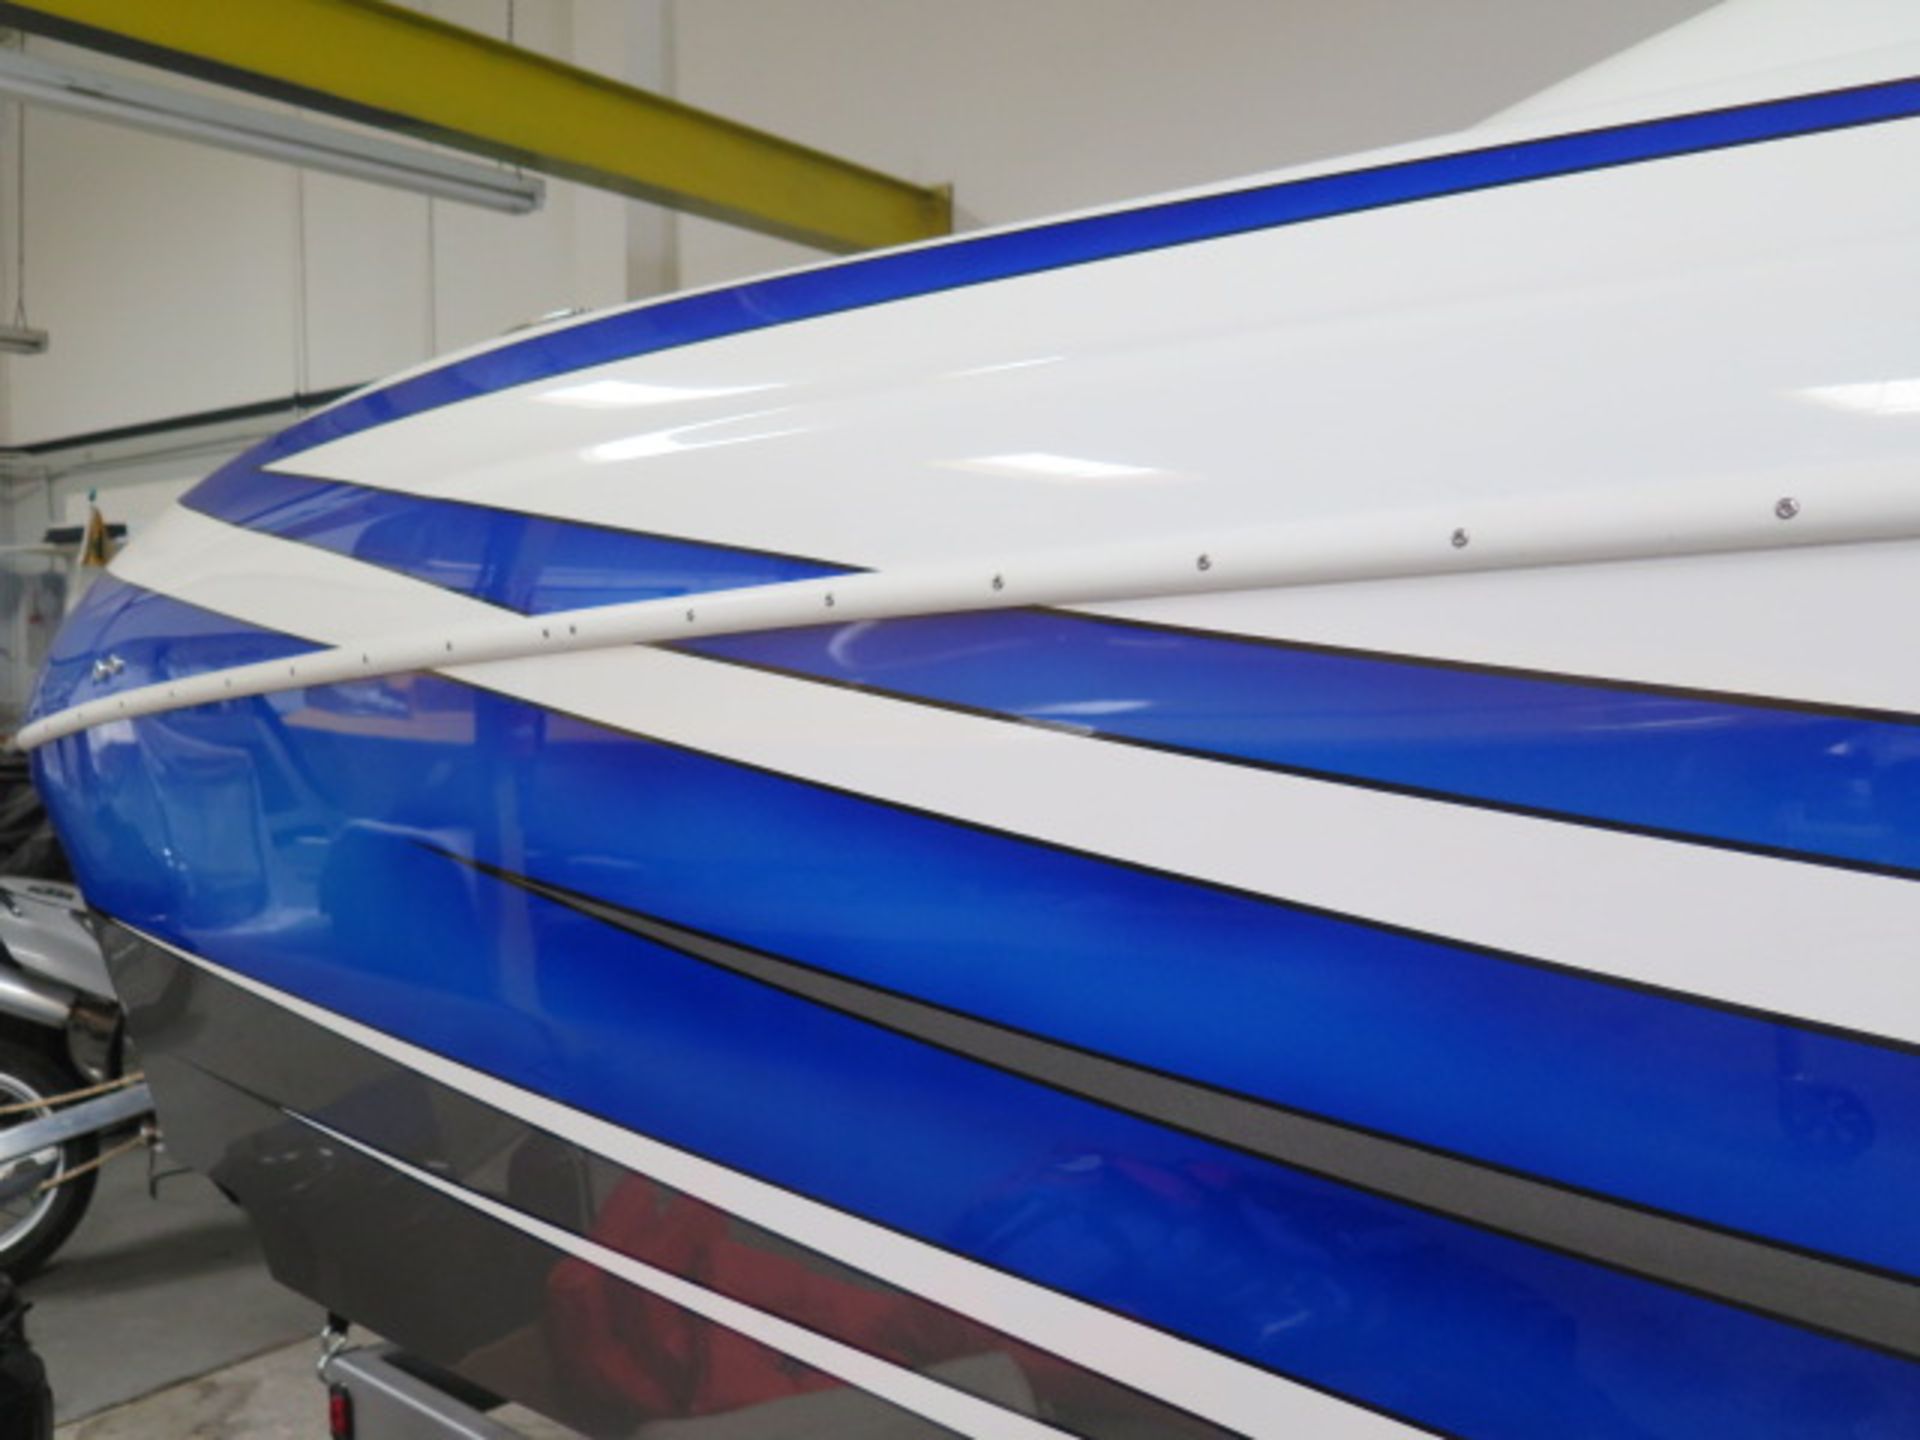 2022 27' Ultra Shadow Balsa Core CAT Hull Built for High Speed,w/Finished Bilge Gel Coat, SOLD AS IS - Image 13 of 21